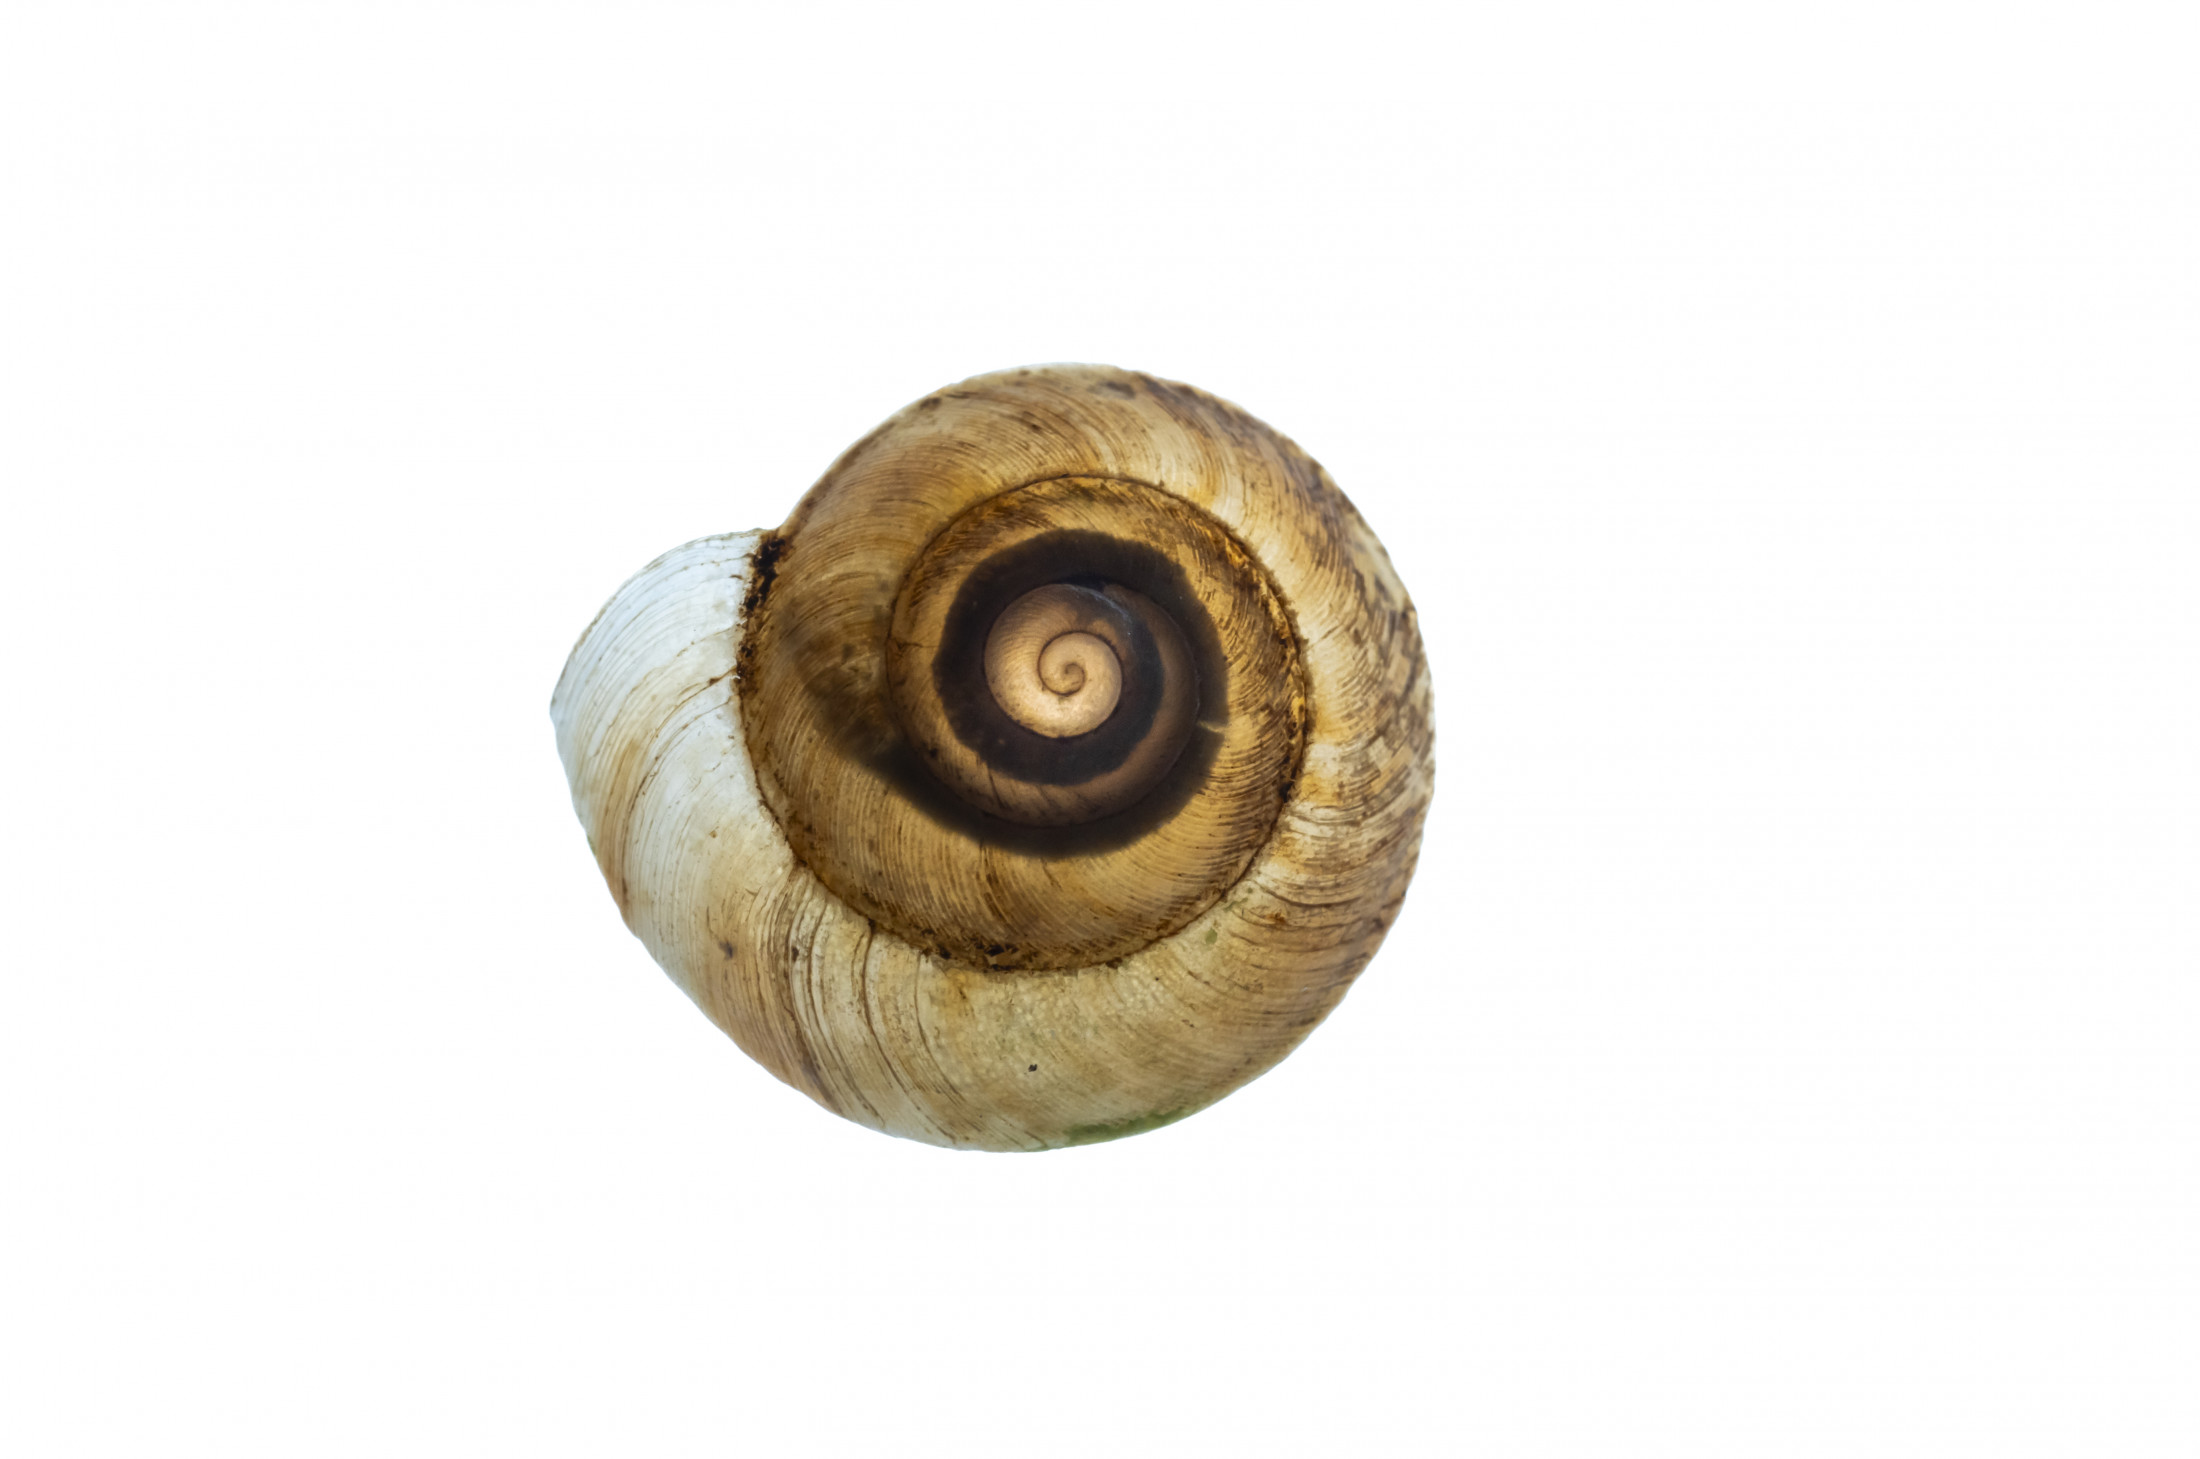 Against a white backdrop, a tightly coiled brown snail shell with defined ridges is illuminated from behind.